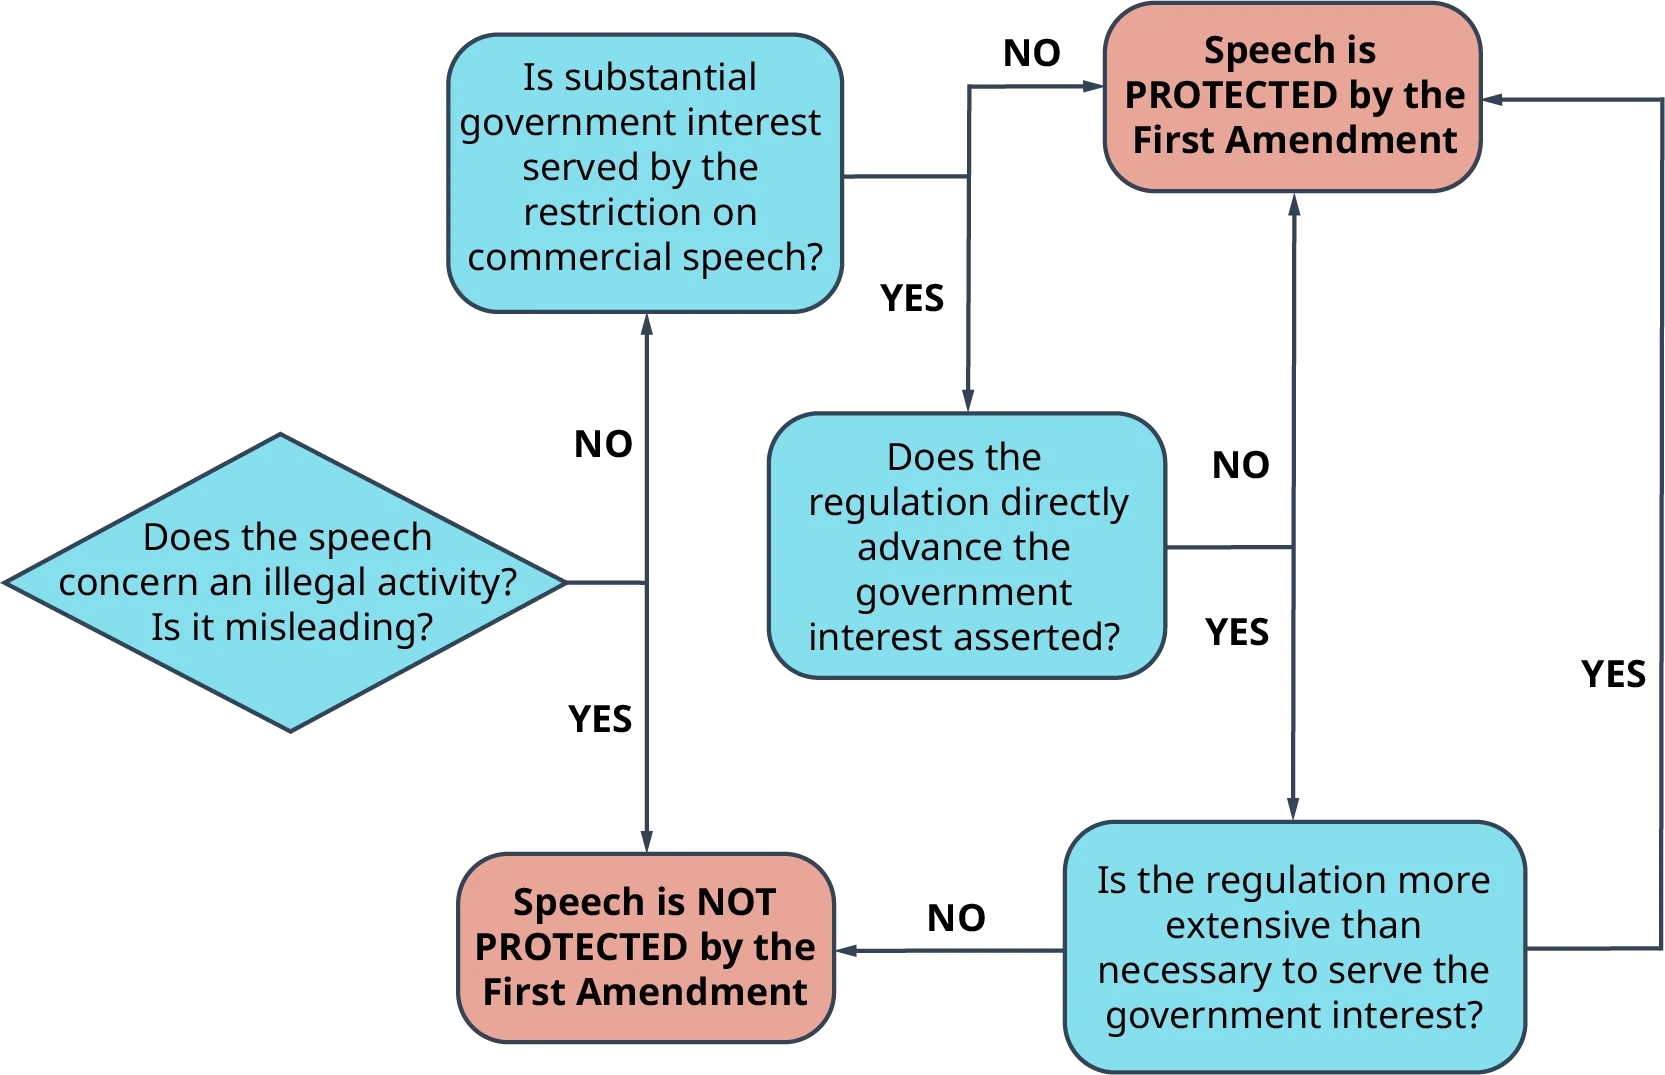 The image depicts a decision tree composed of Question boxes connected by binary determinations of Yes and No.  The end-points of each pathway in the tree lead to two destinations, which are as follows:  “Speech is not protected by the First Amendment,” or “Speech is protected by the First Amendment.”    The tree flows as follows: “Does the speech concern an illegal activity?  Is it misleading?”  If yes, “Speech is not protected by the first amendment.”  If no, a new question is presented, reading, “Is substantial government interest served by the restriction on commercial speech?”  If no, the end point is that the speech is protected by the First Amendment.    If the question regarding substantial government interest being served by the restriction is yes, the subsequent question reads, “Does the regulation directly advance the government interest asserted?”  If no, the speech is protected by the First Amendment.  If yes, the final question in this pathway reads, “Is the regulation more extensive than necessary to serve the government interest?”  If yes, the speech is protected by the First Amendment.  If no, the speech is not protected by the First Amendment. 